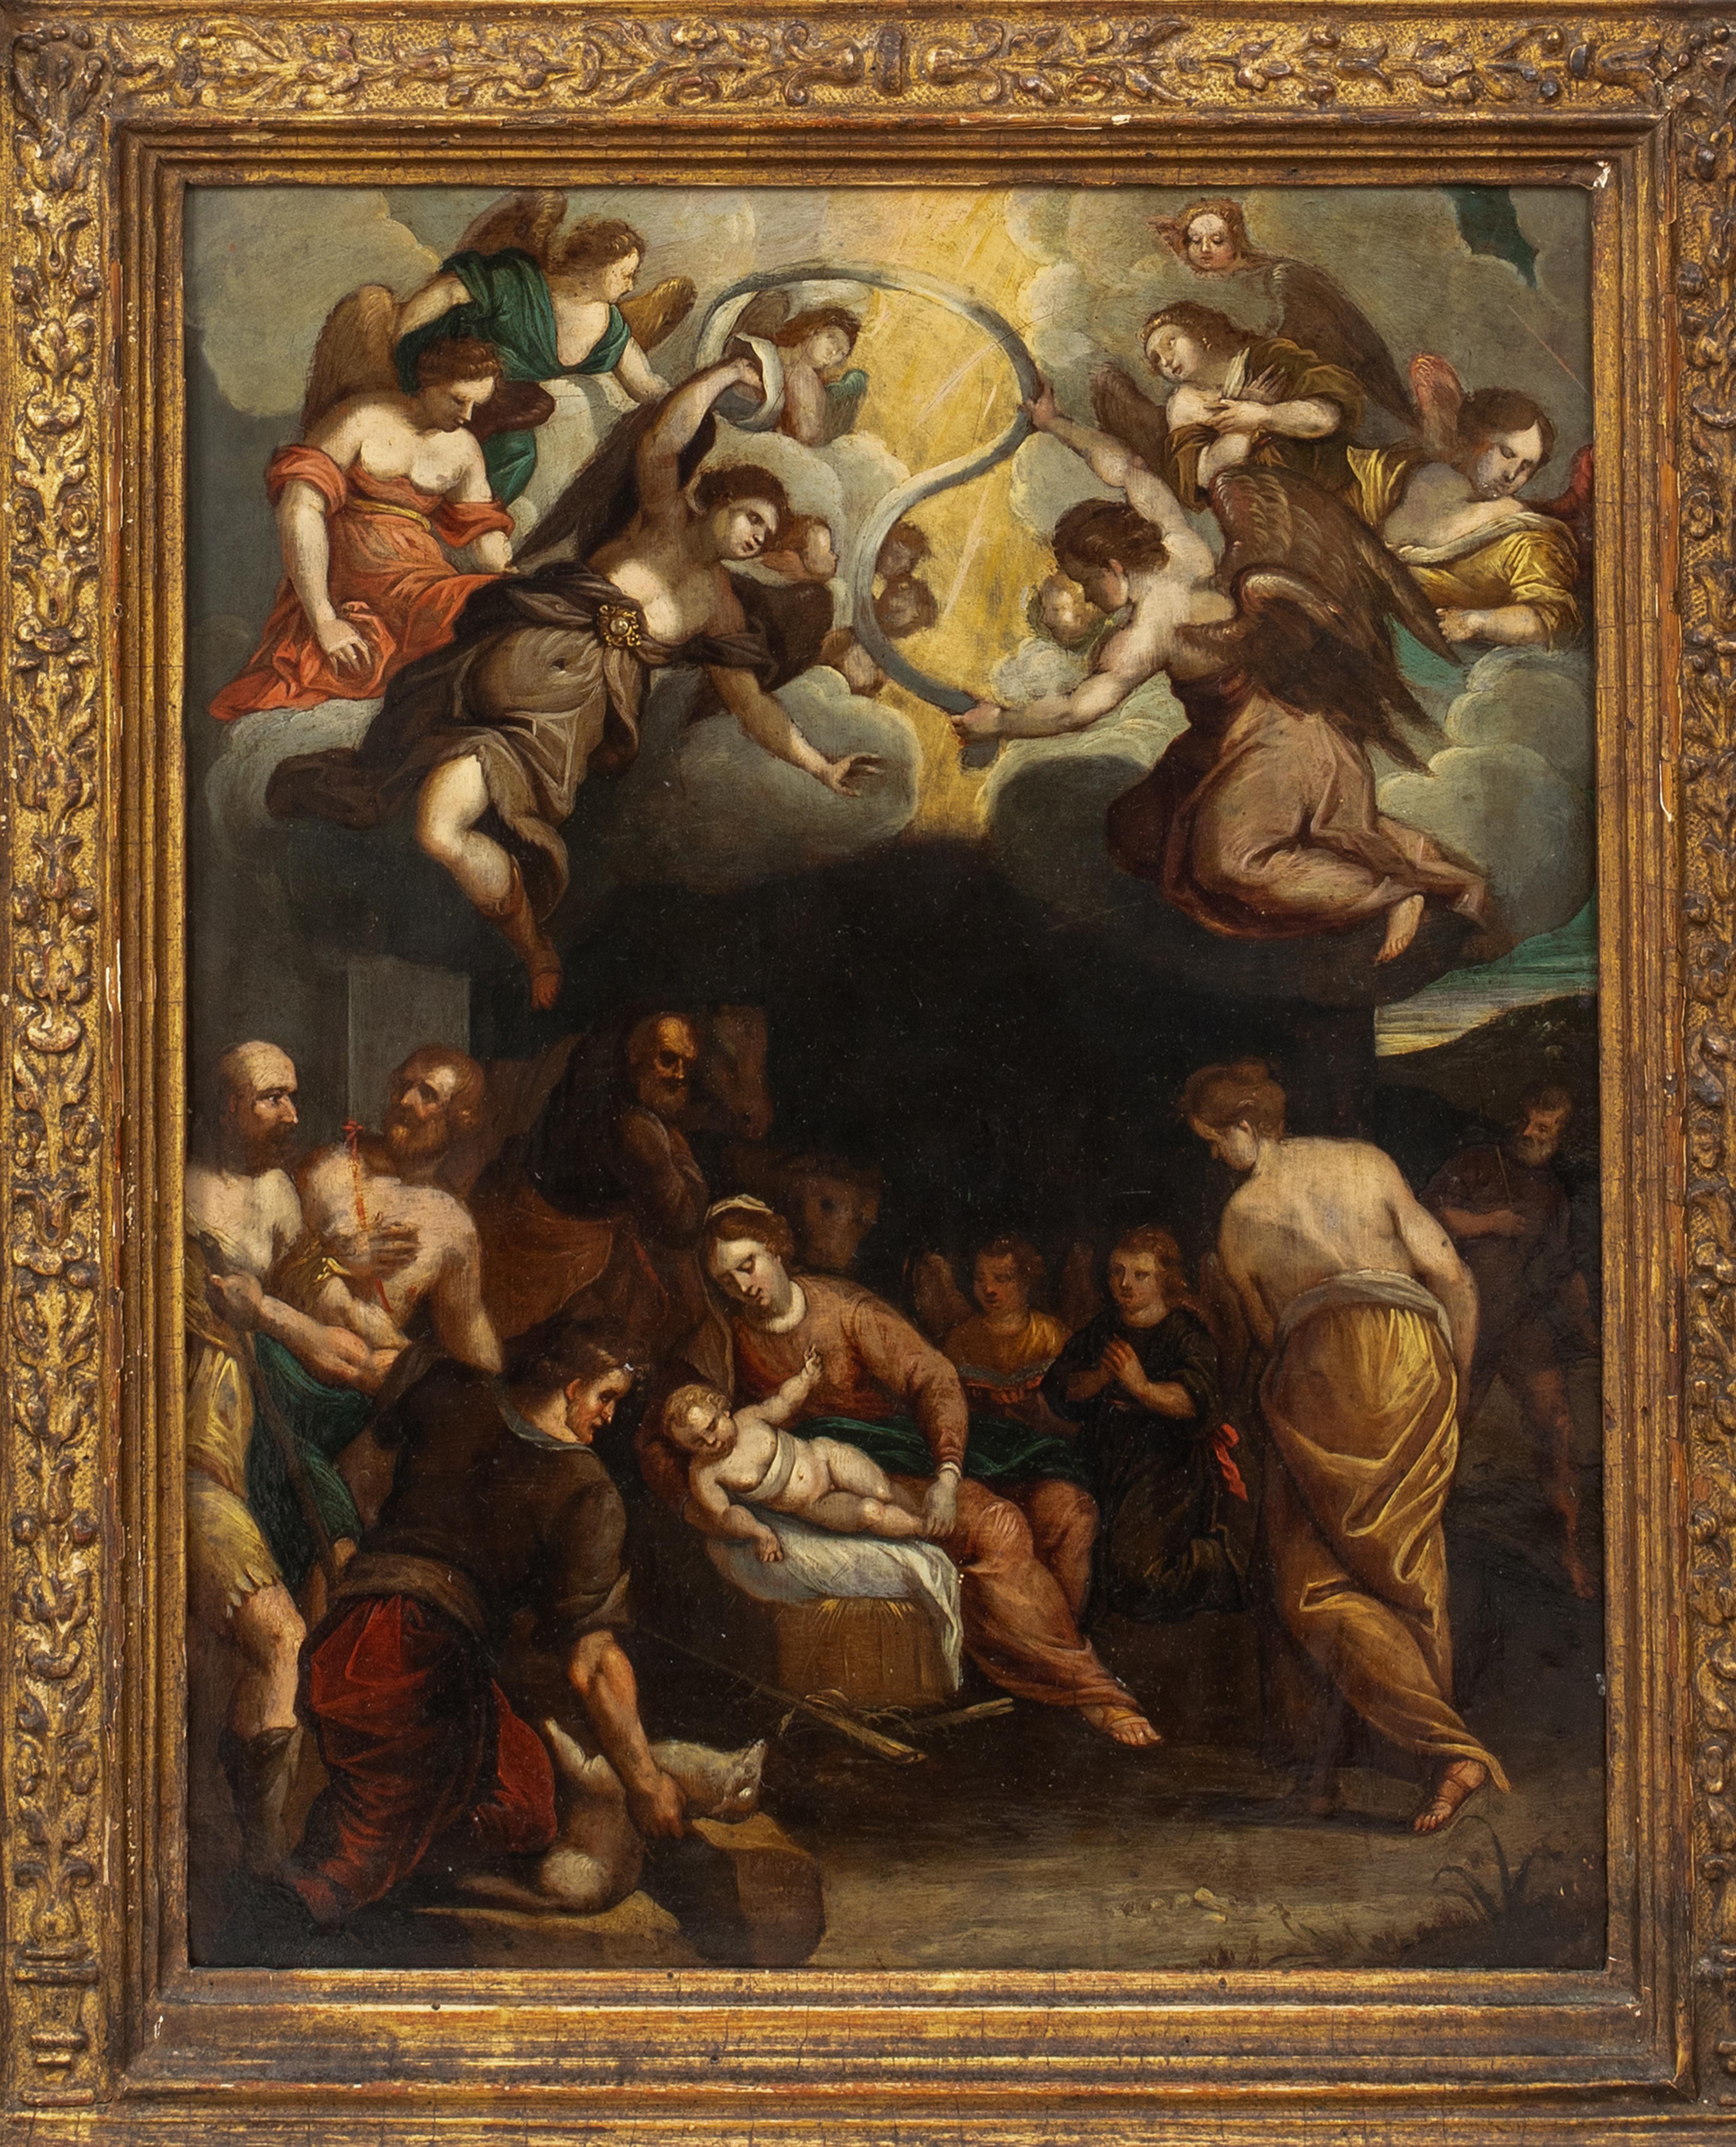 The Adoration of the Shepherds, 16th Century 

HANS VON AACHEN (1552-1615)

Large 16th Century German Old Master depiction of the Adoration Of The Shepherds, oil on copper Hans Von Aachen. Excellent quality and condition devotional scene of the